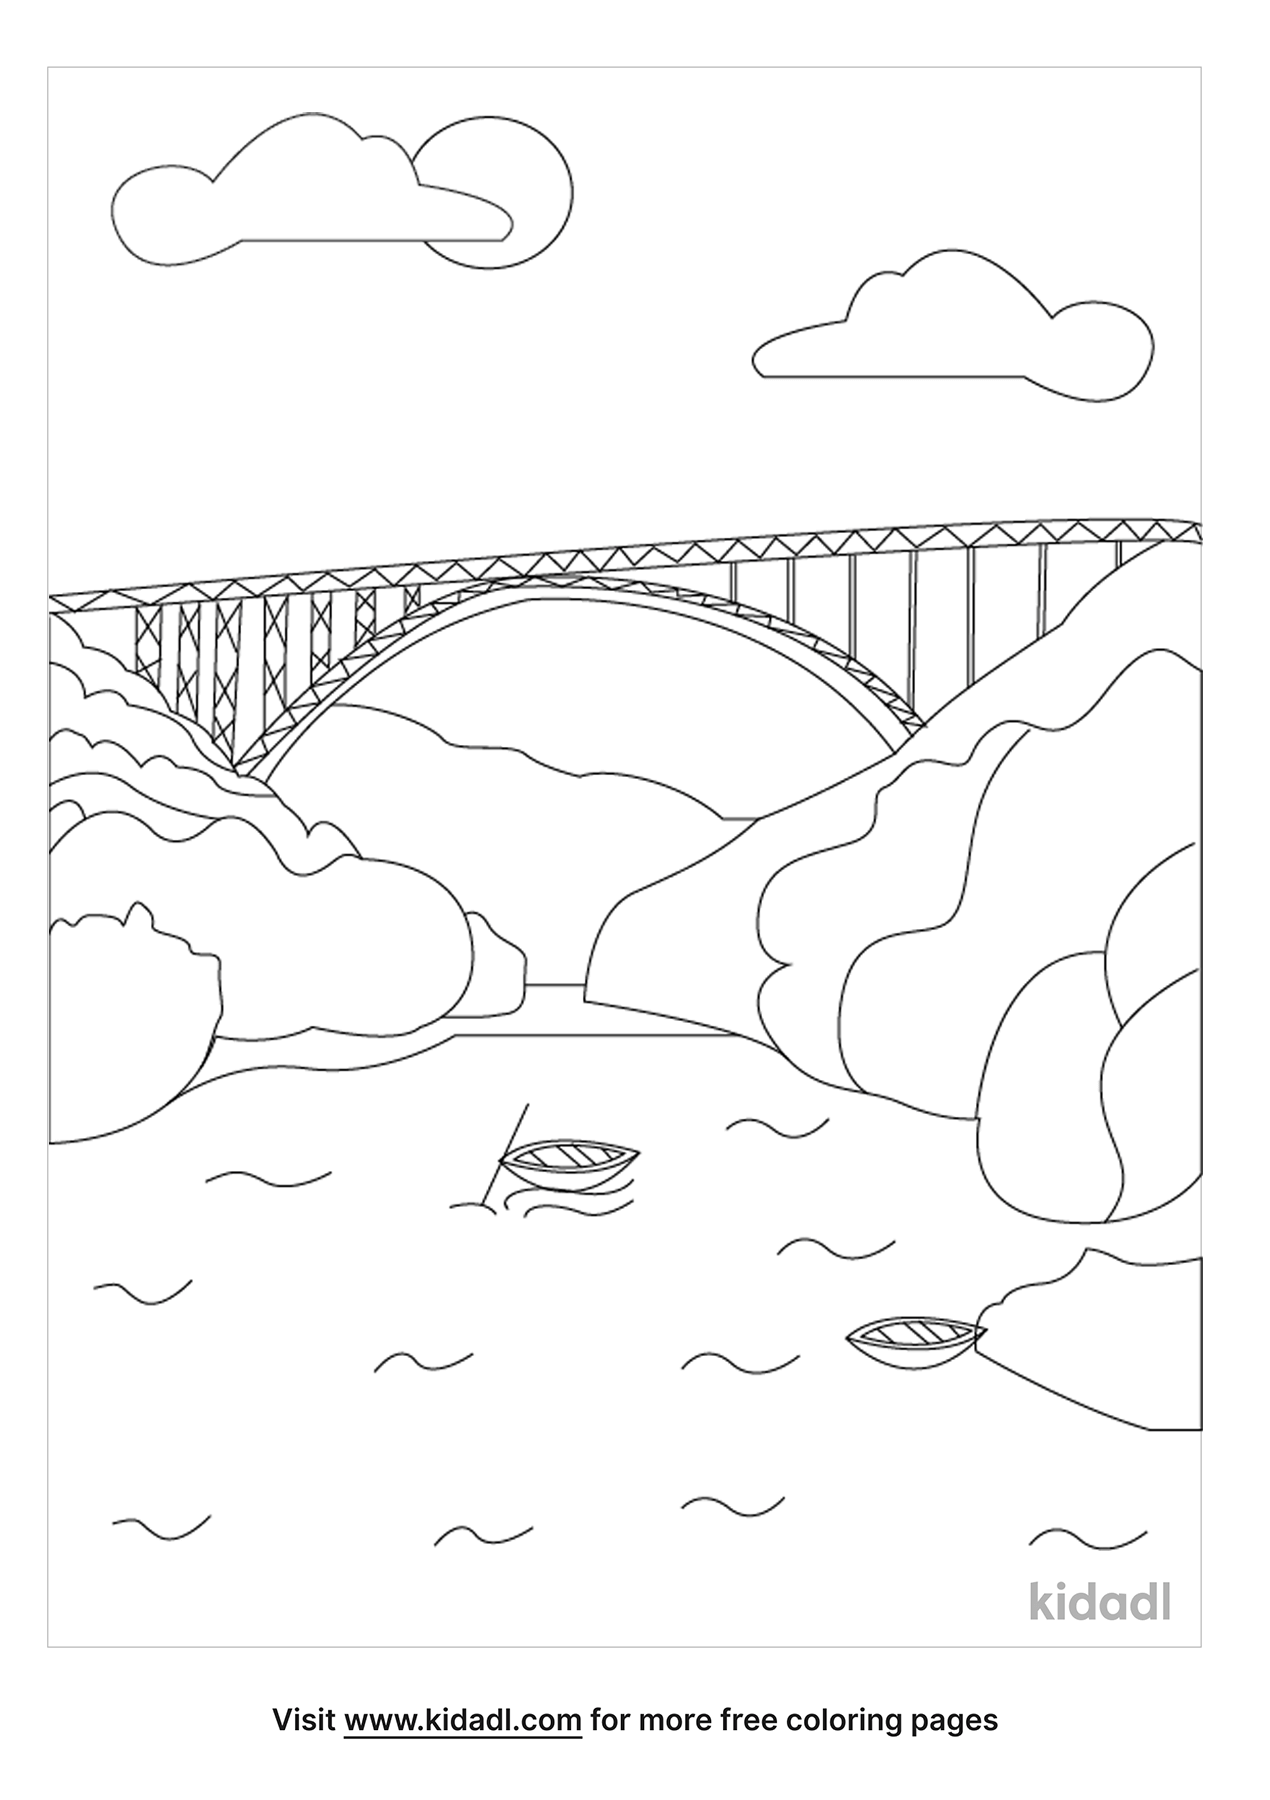 New River Gorge Wv Coloring Pages | Free World, Geography & Flags Coloring  Pages | Kidadl